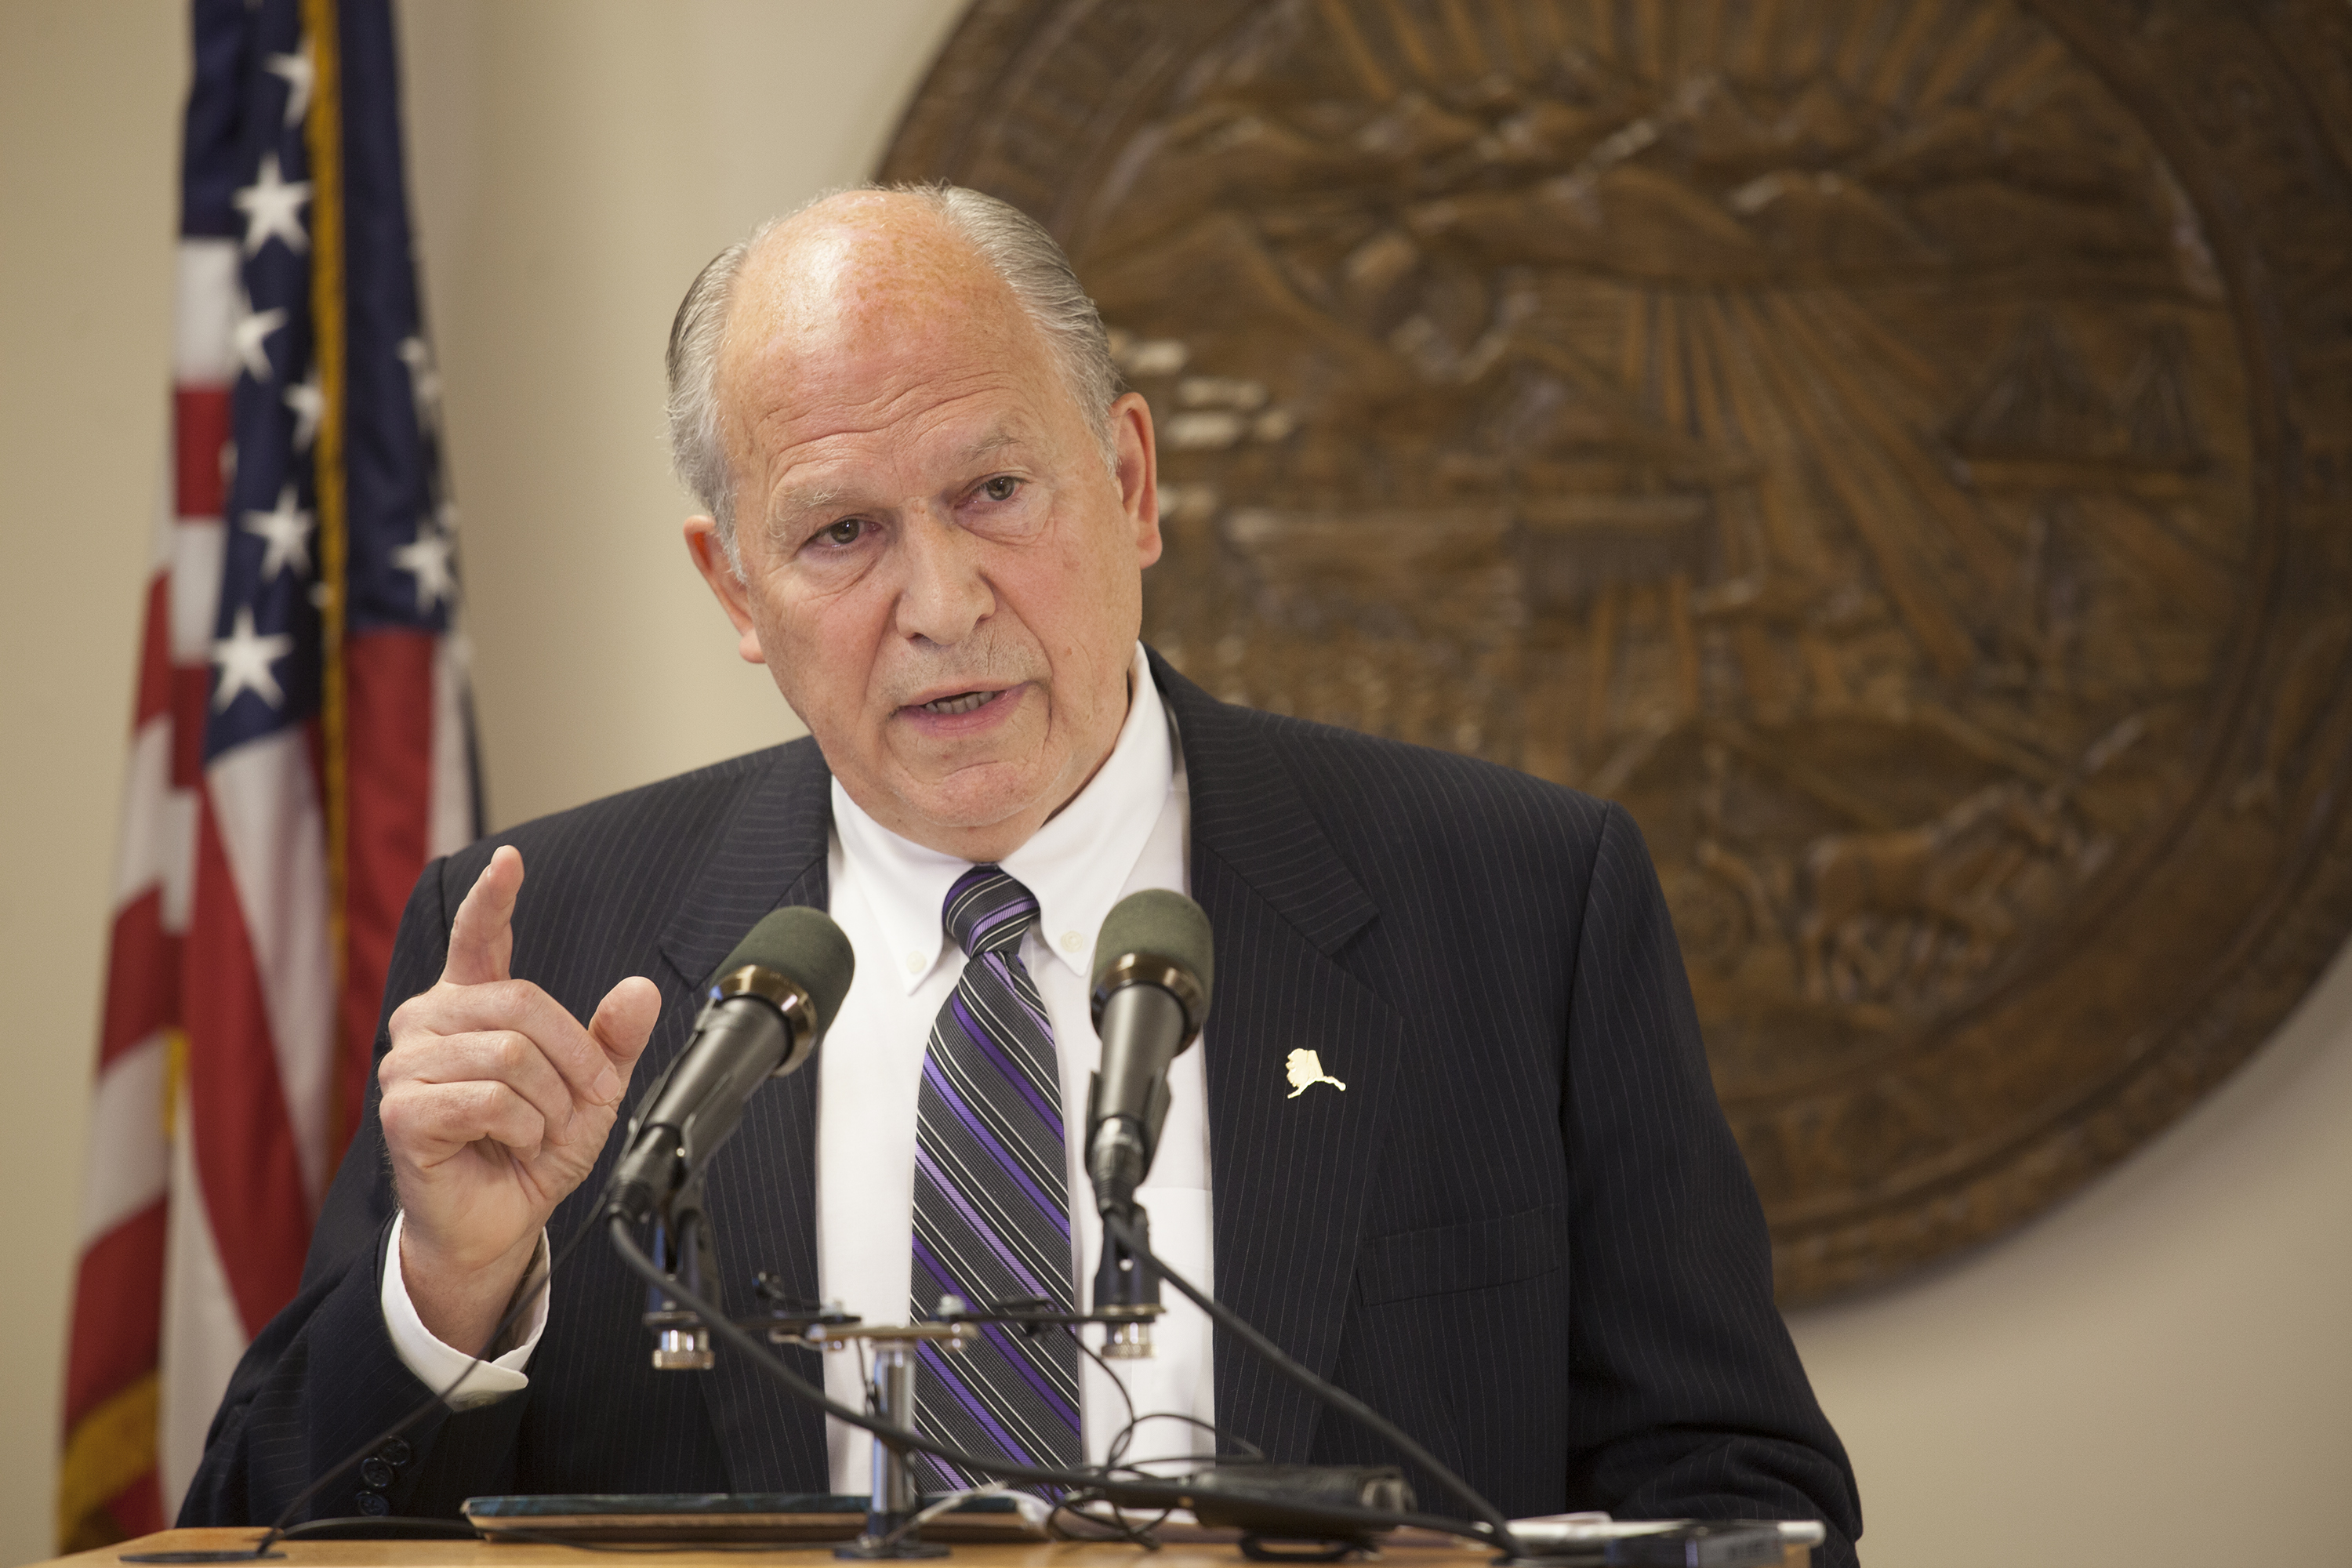 Alaska Gov. Bill Walker talks about the state's budget on Wednesday, June 1, 2016 during a press conference in Juneau, Alaska. (Photo by Rashah McChesney, KTOO - Juneau)